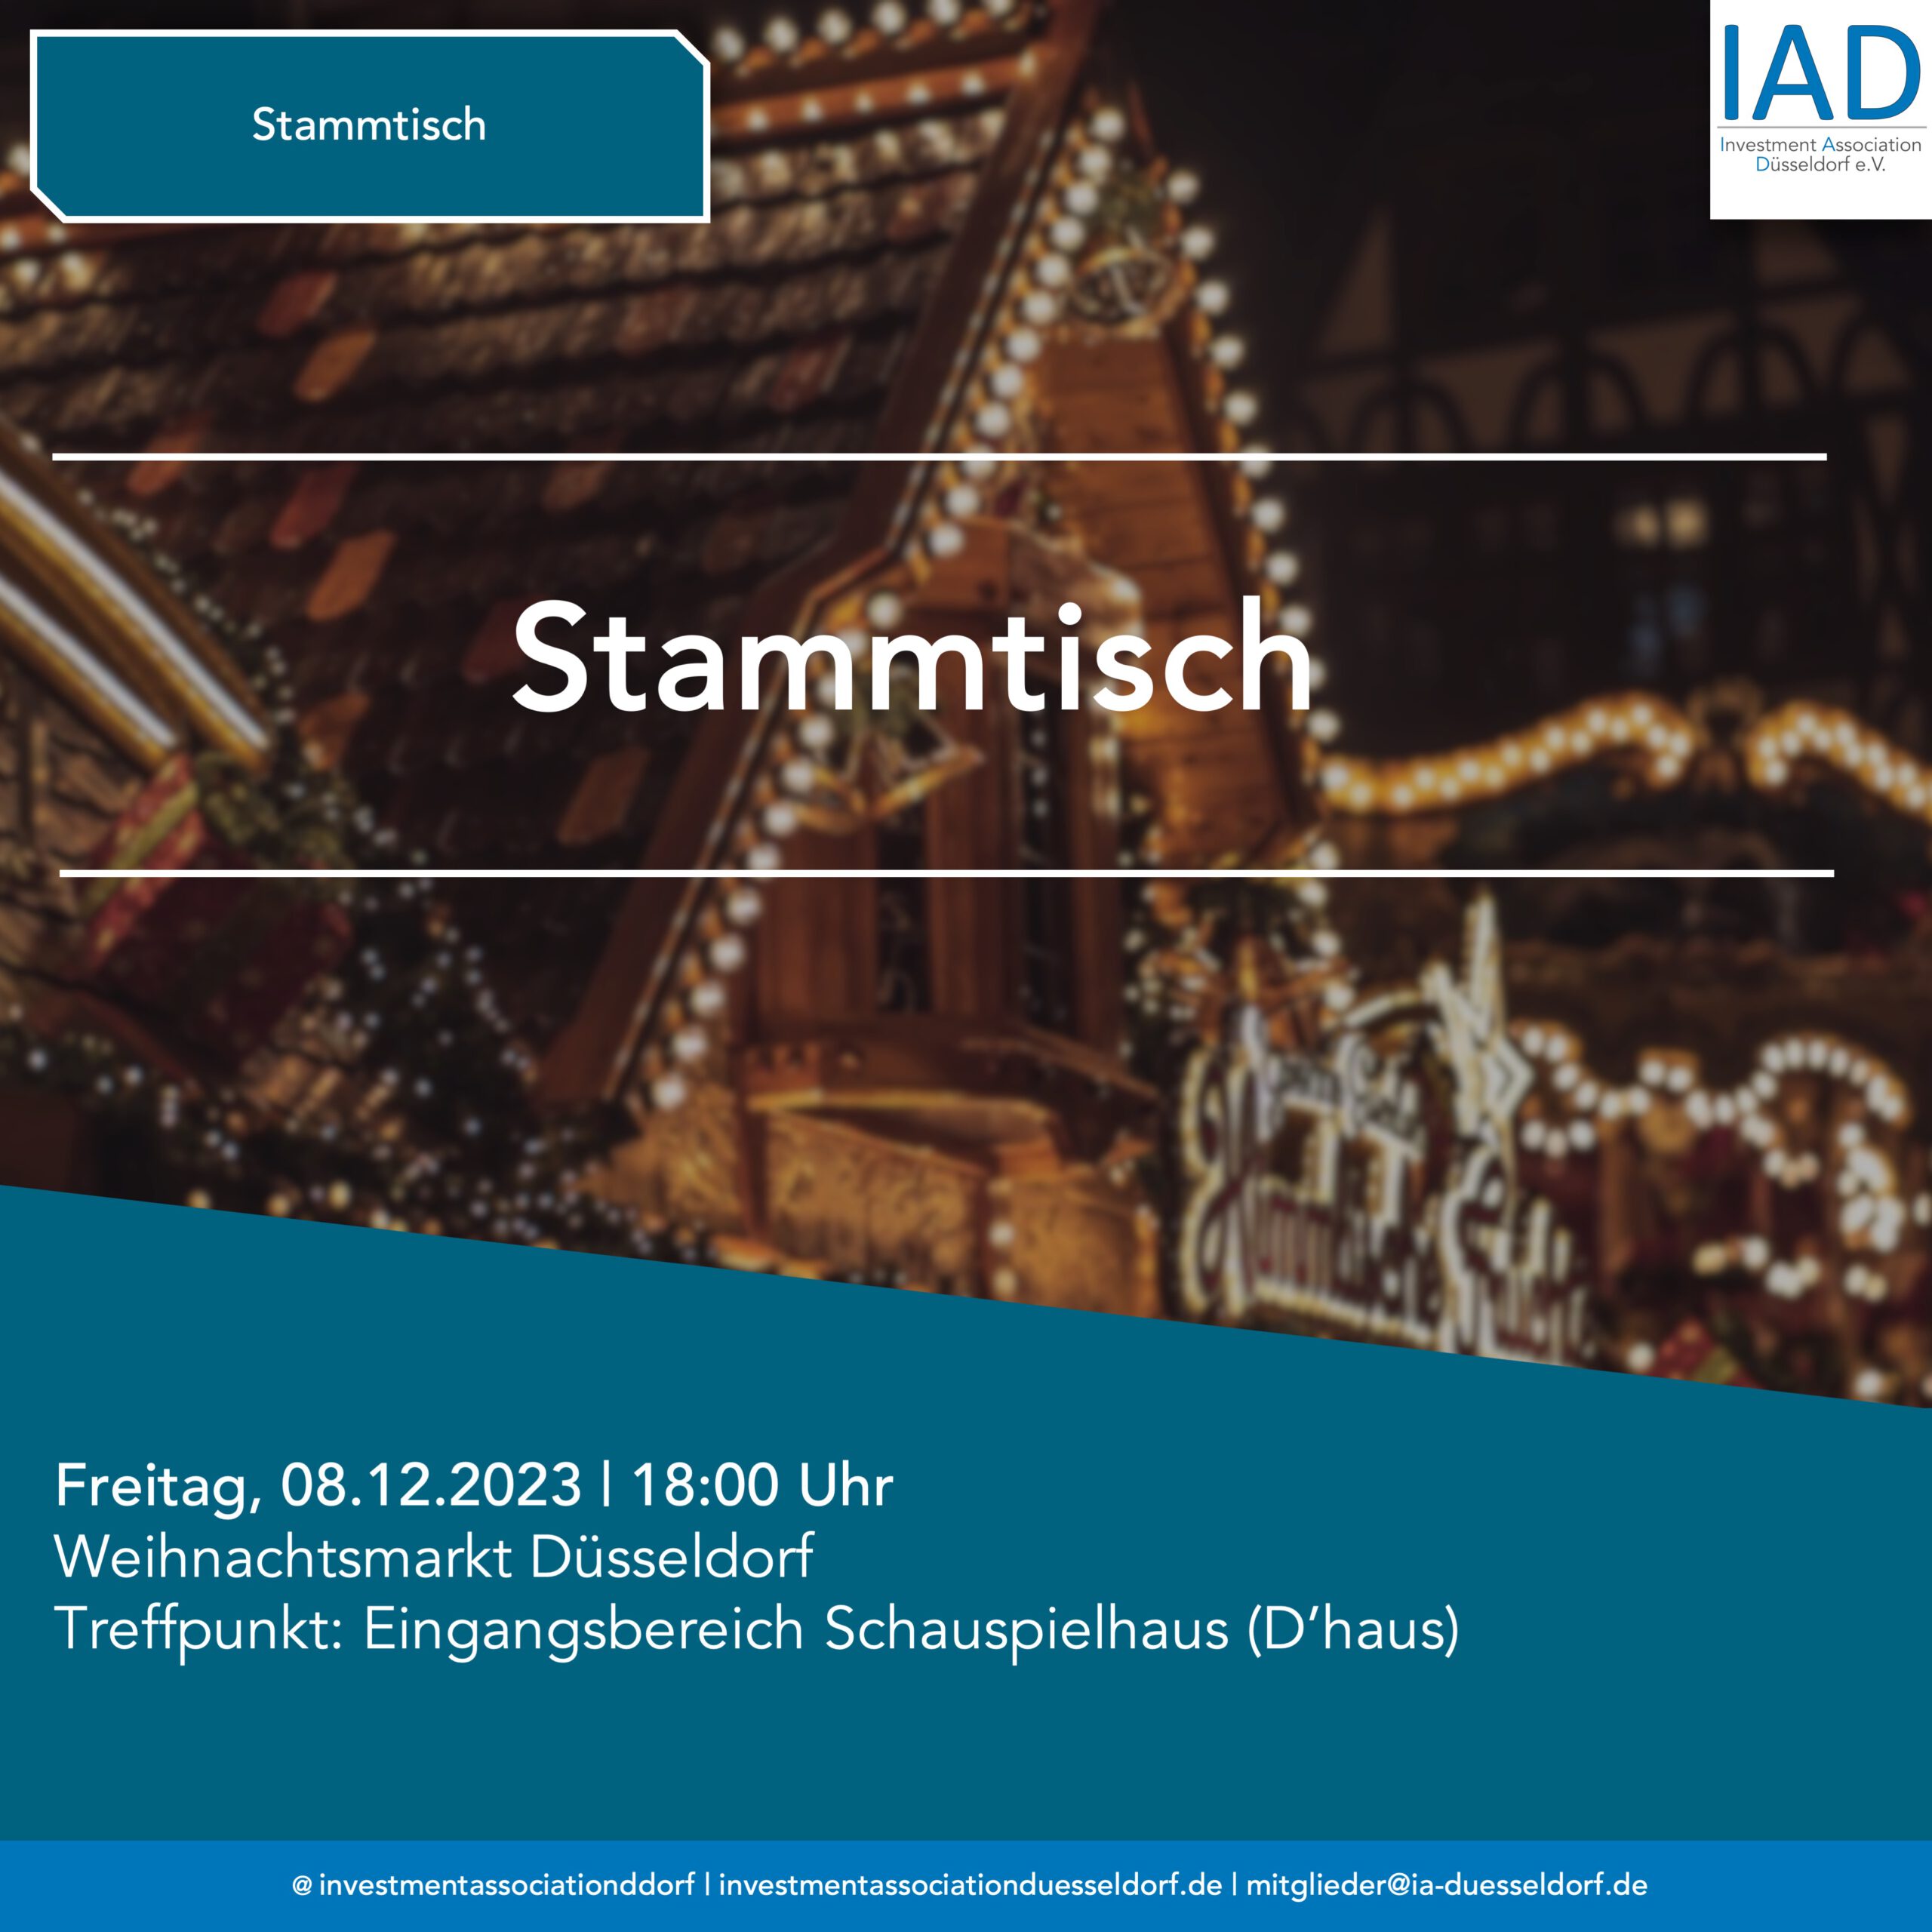 You are currently viewing IAD-Stammtisch (08.12.2023 – 18:00 Uhr)